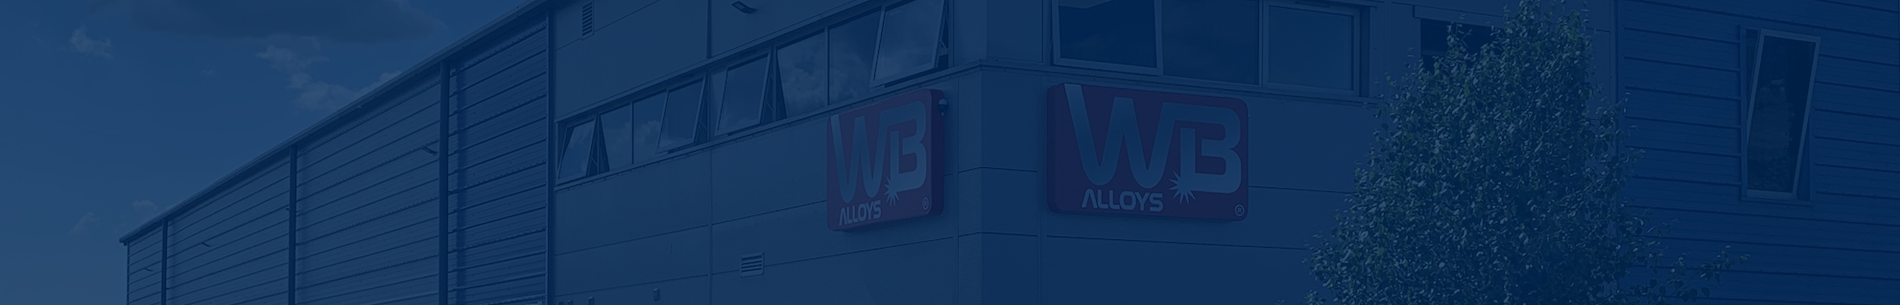 WB alloys building in blue banner